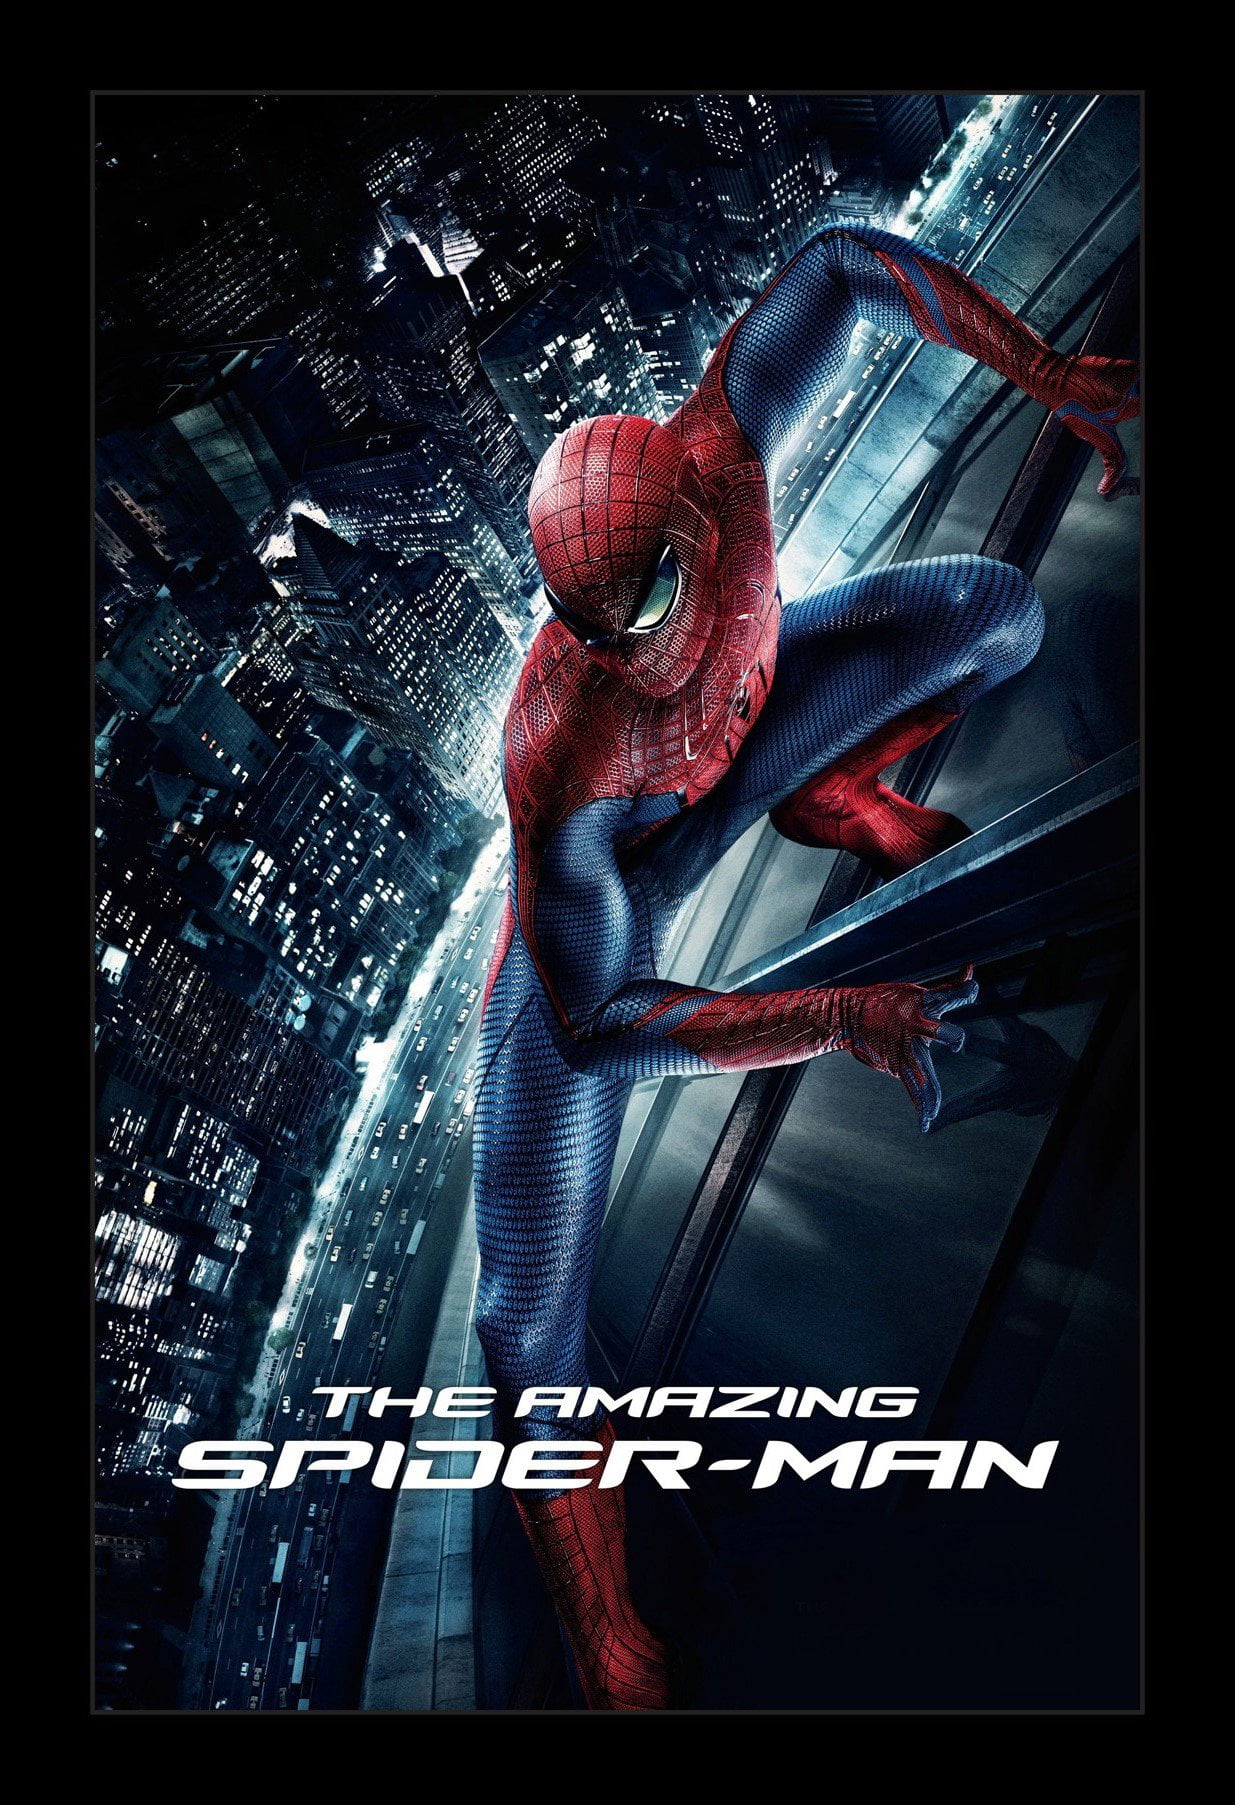 THE AMAZING SPIDER-MAN - 11x17 Framed Movie Poster